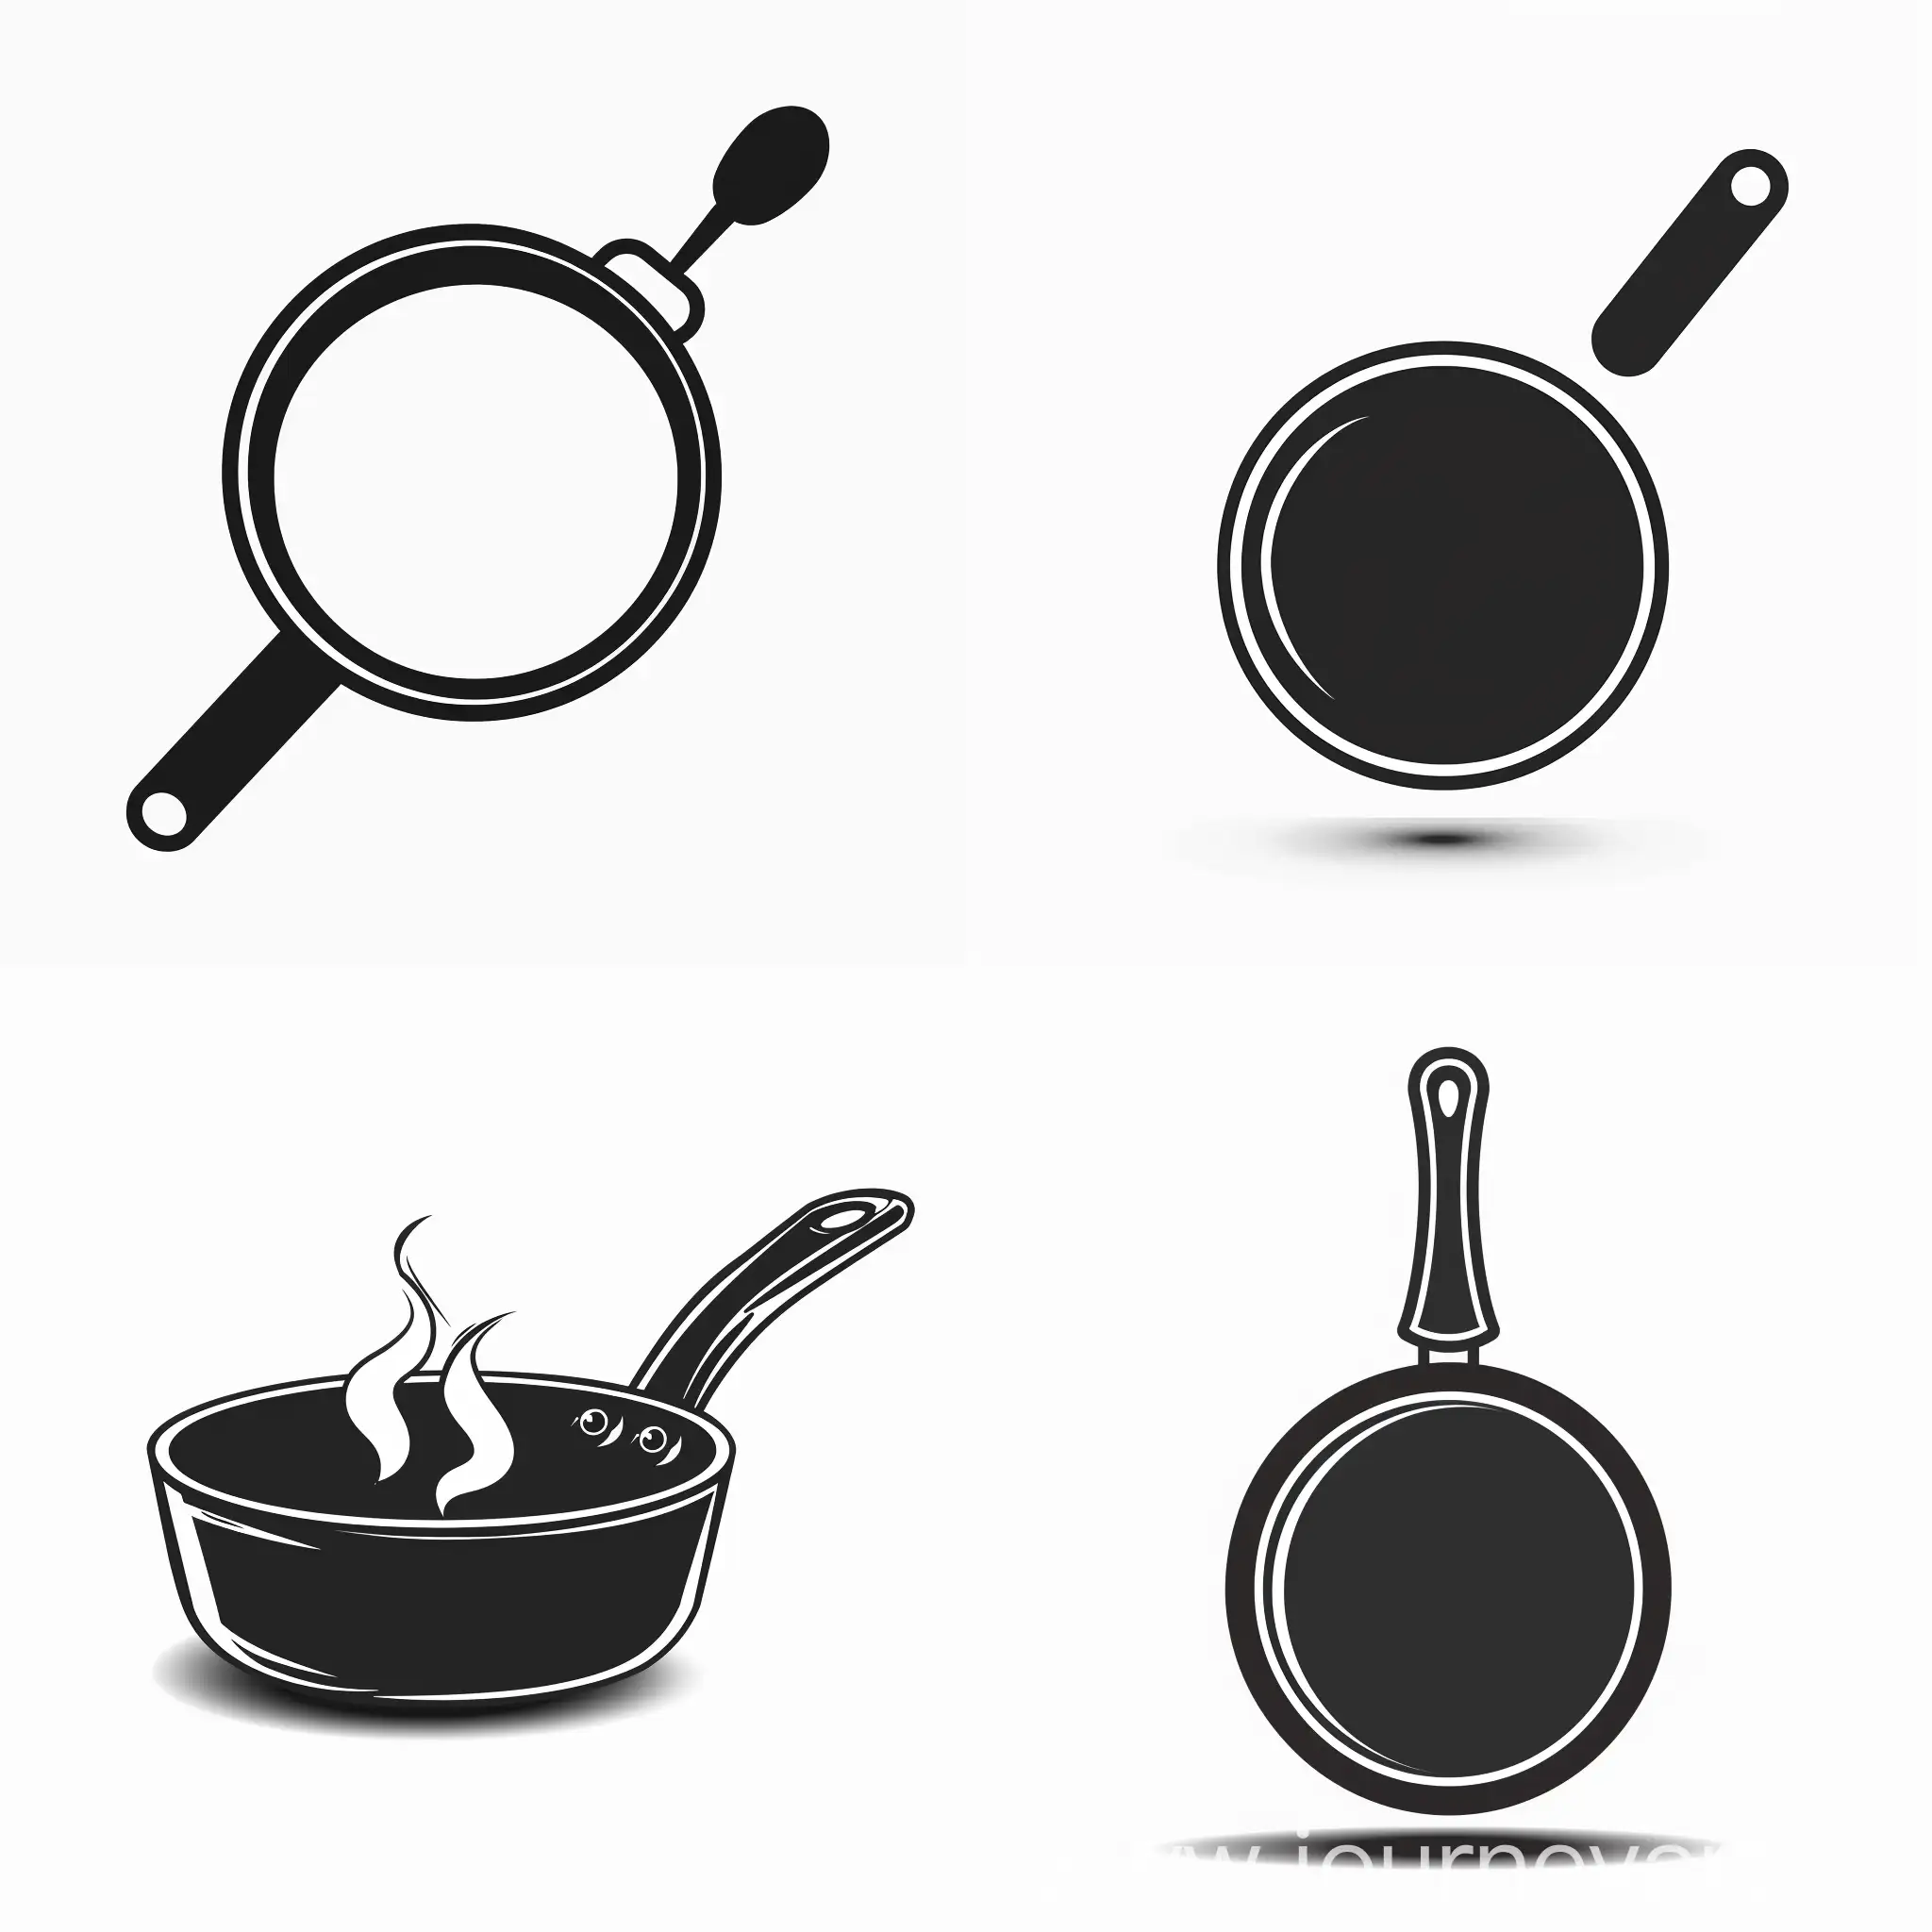 Classic-Black-and-White-Frying-Pan-Icon-Logo